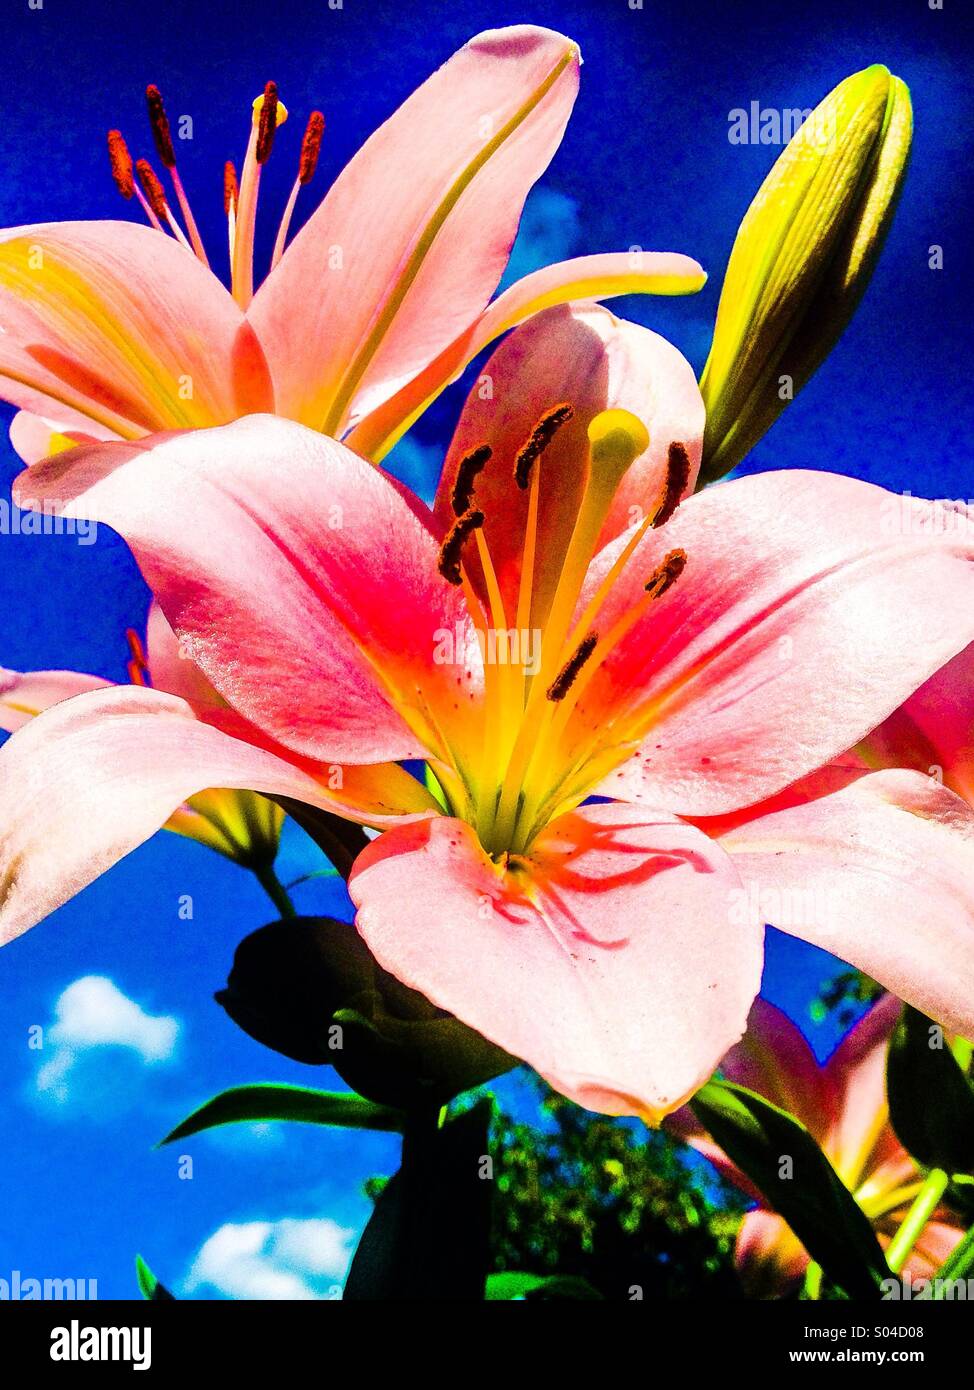 Pink Lilies with blue sky in the background Stock Photo